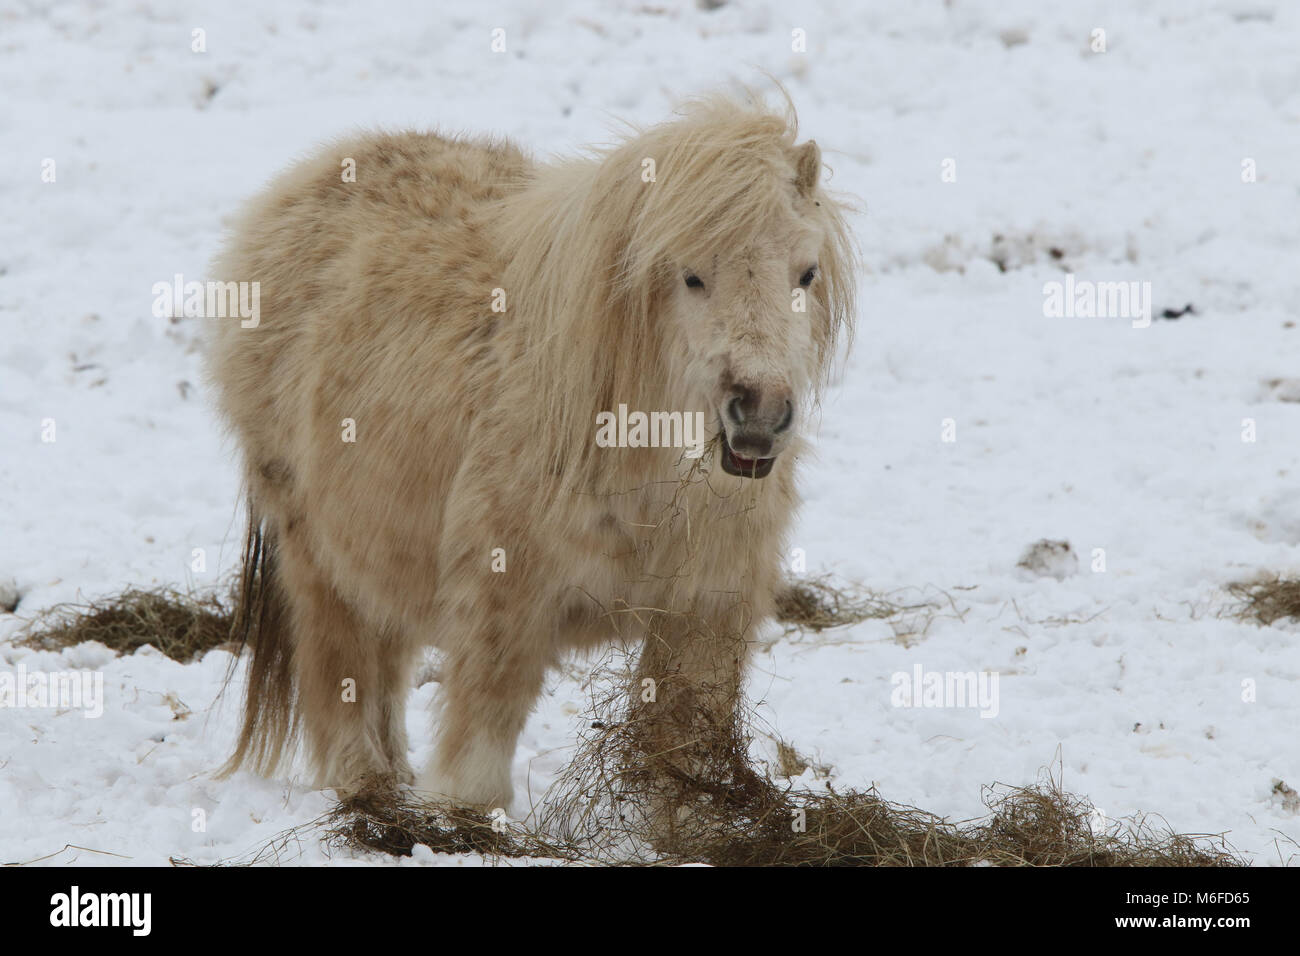 Howardian Hills, North Yorkshire, UK. 3rd March 2018. Shetland Ponies feeding in the freezing weather conditions Credit: credit: Matt Pennington / Alamy Live News Stock Photo